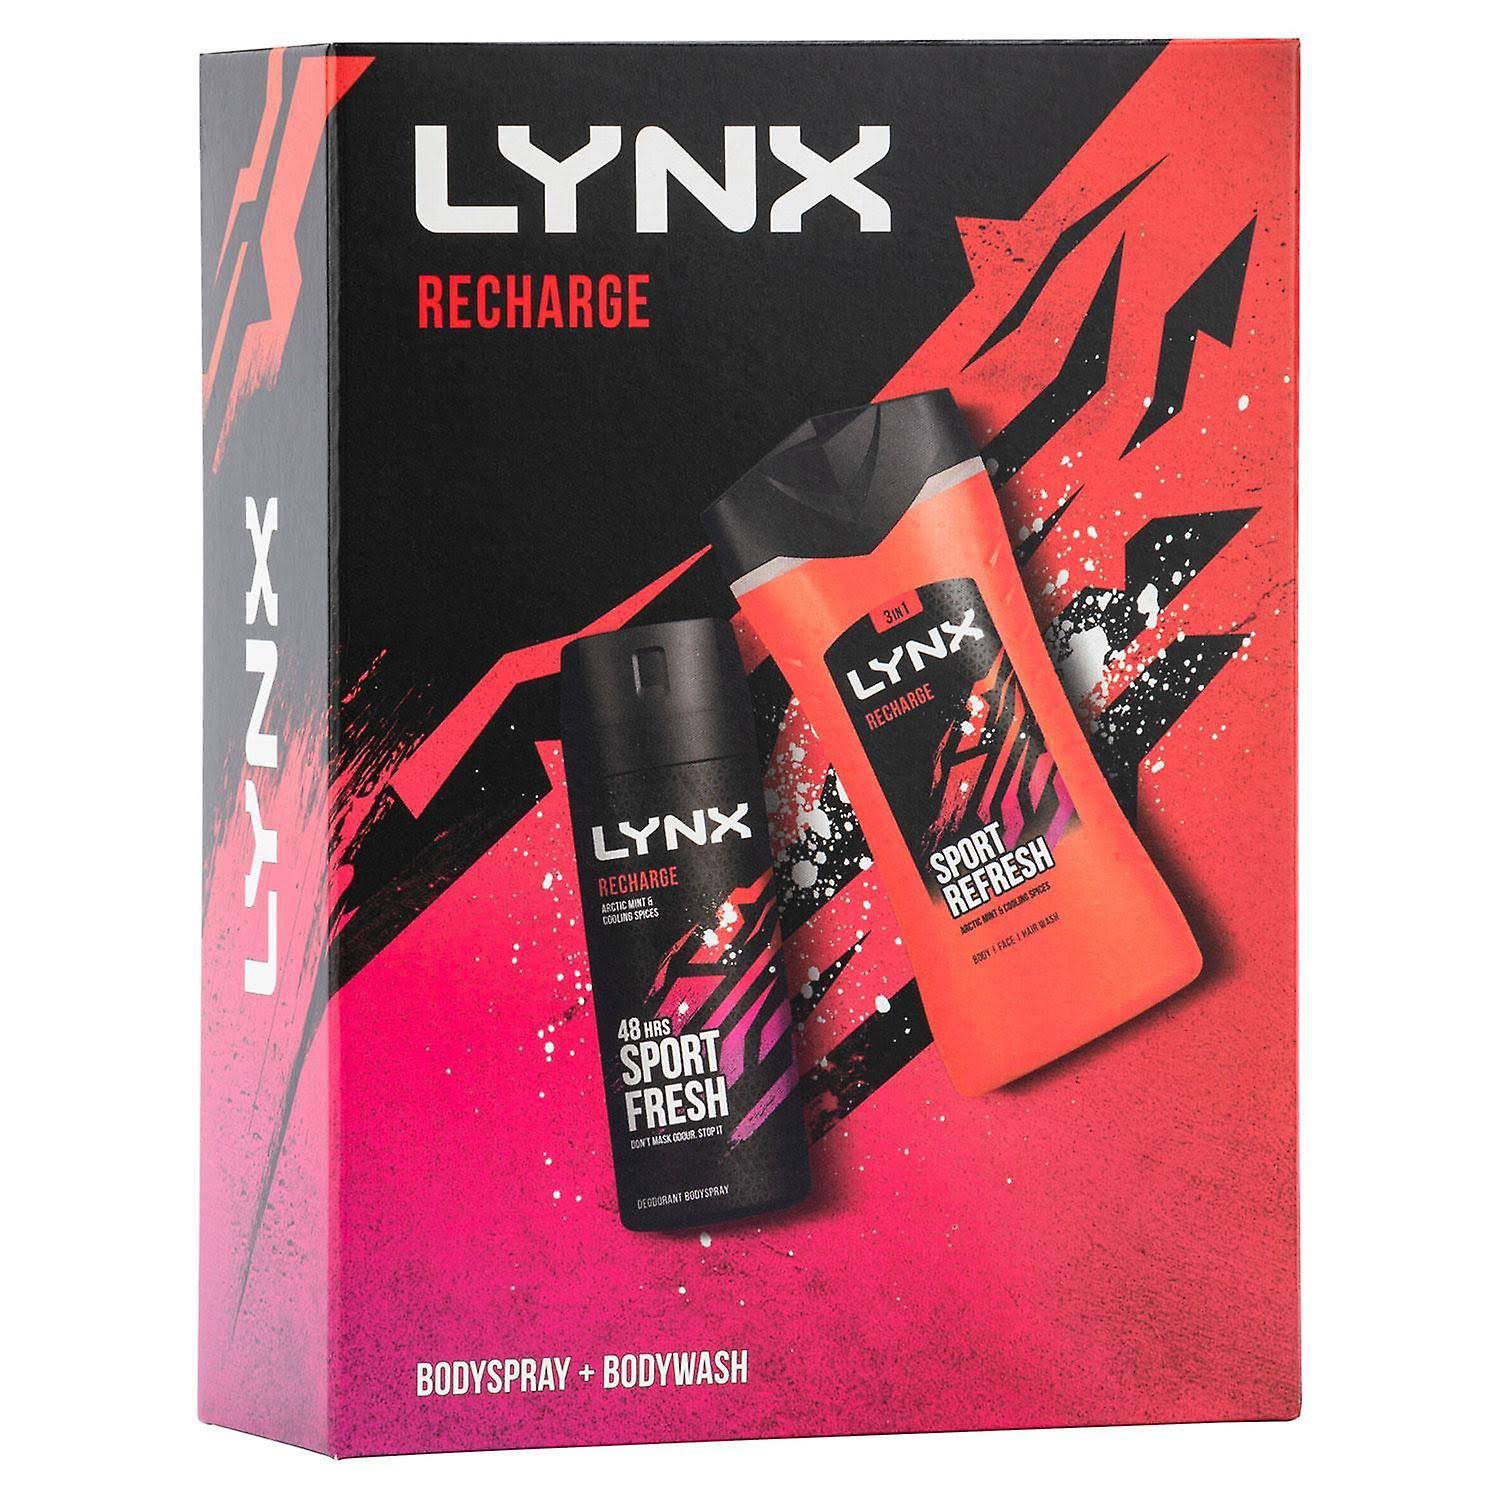 2x Lynx Recharge Duo Gift Set For Him, Body Spray 150ml & Body Wash 225ml Red